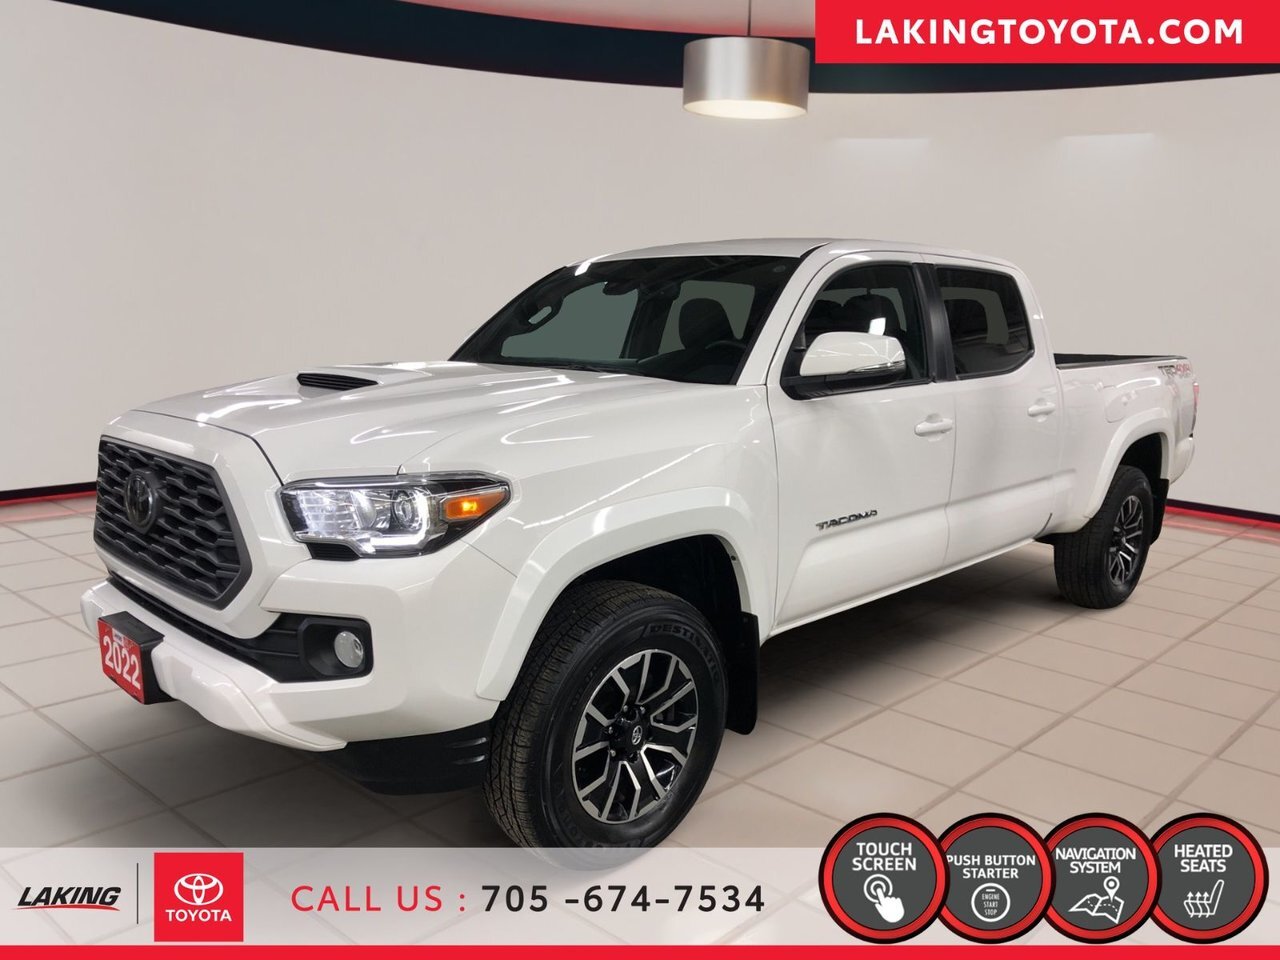 2022 Toyota Tacoma TRD 4X4 SPORT Double Cab This Toyota Tacoma is the